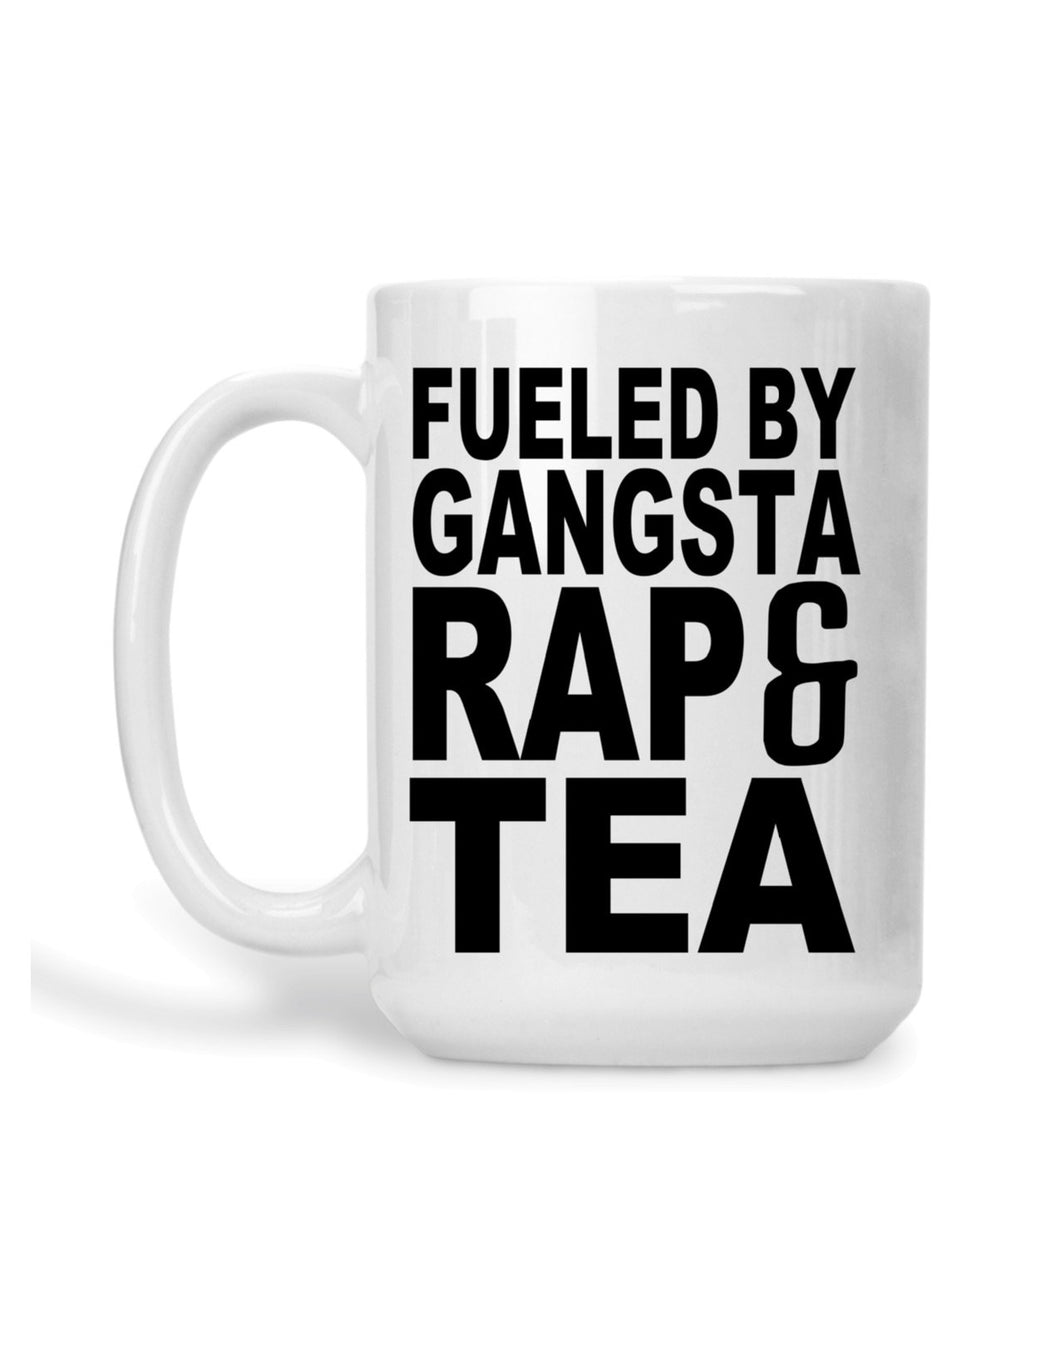 Fueled by gangsta rap and tea